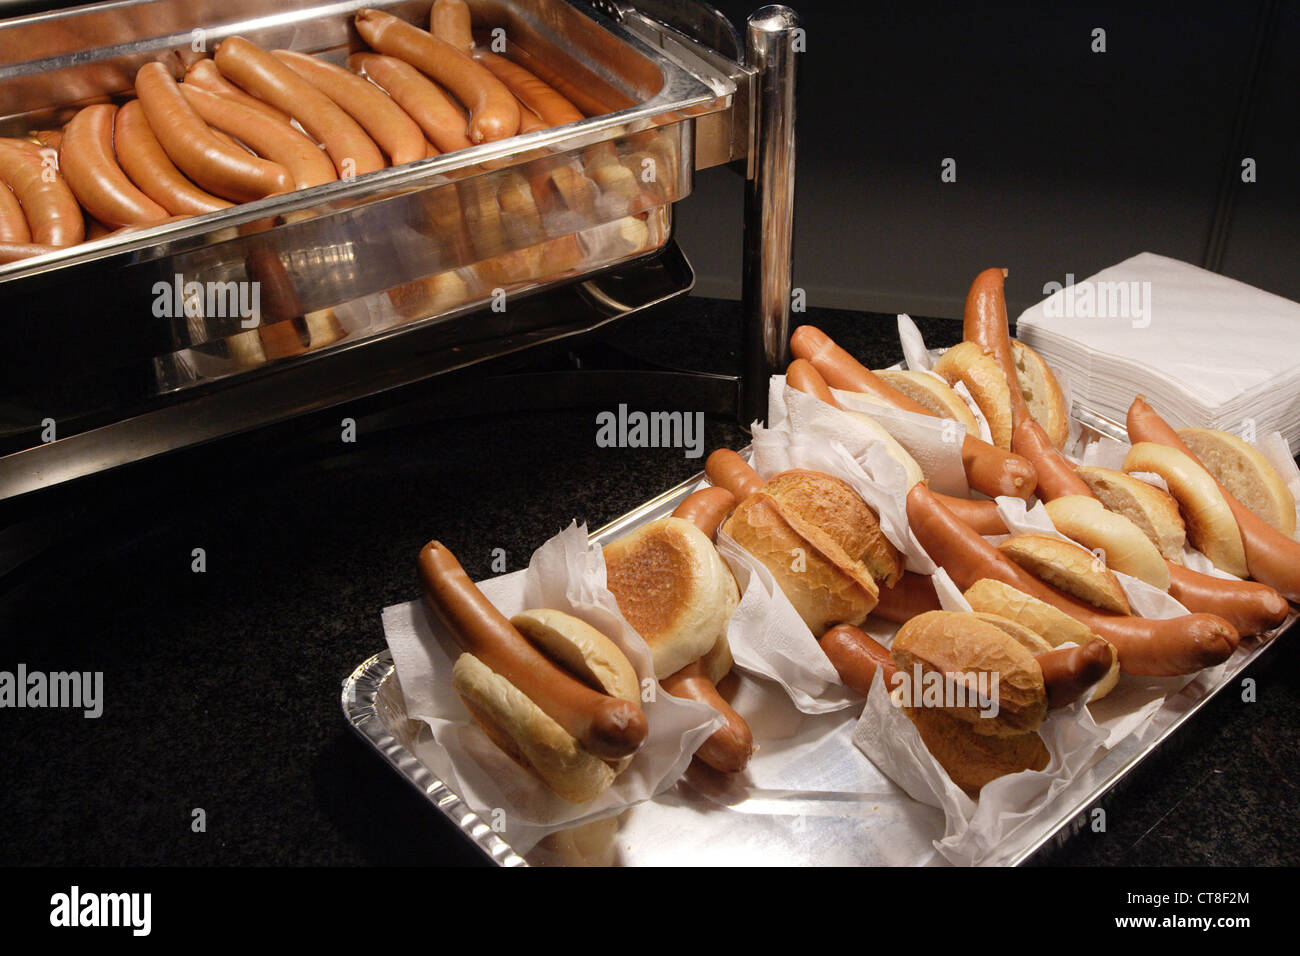 Concession Stand with sausages in buns, Lufthansa HV Stock Photo